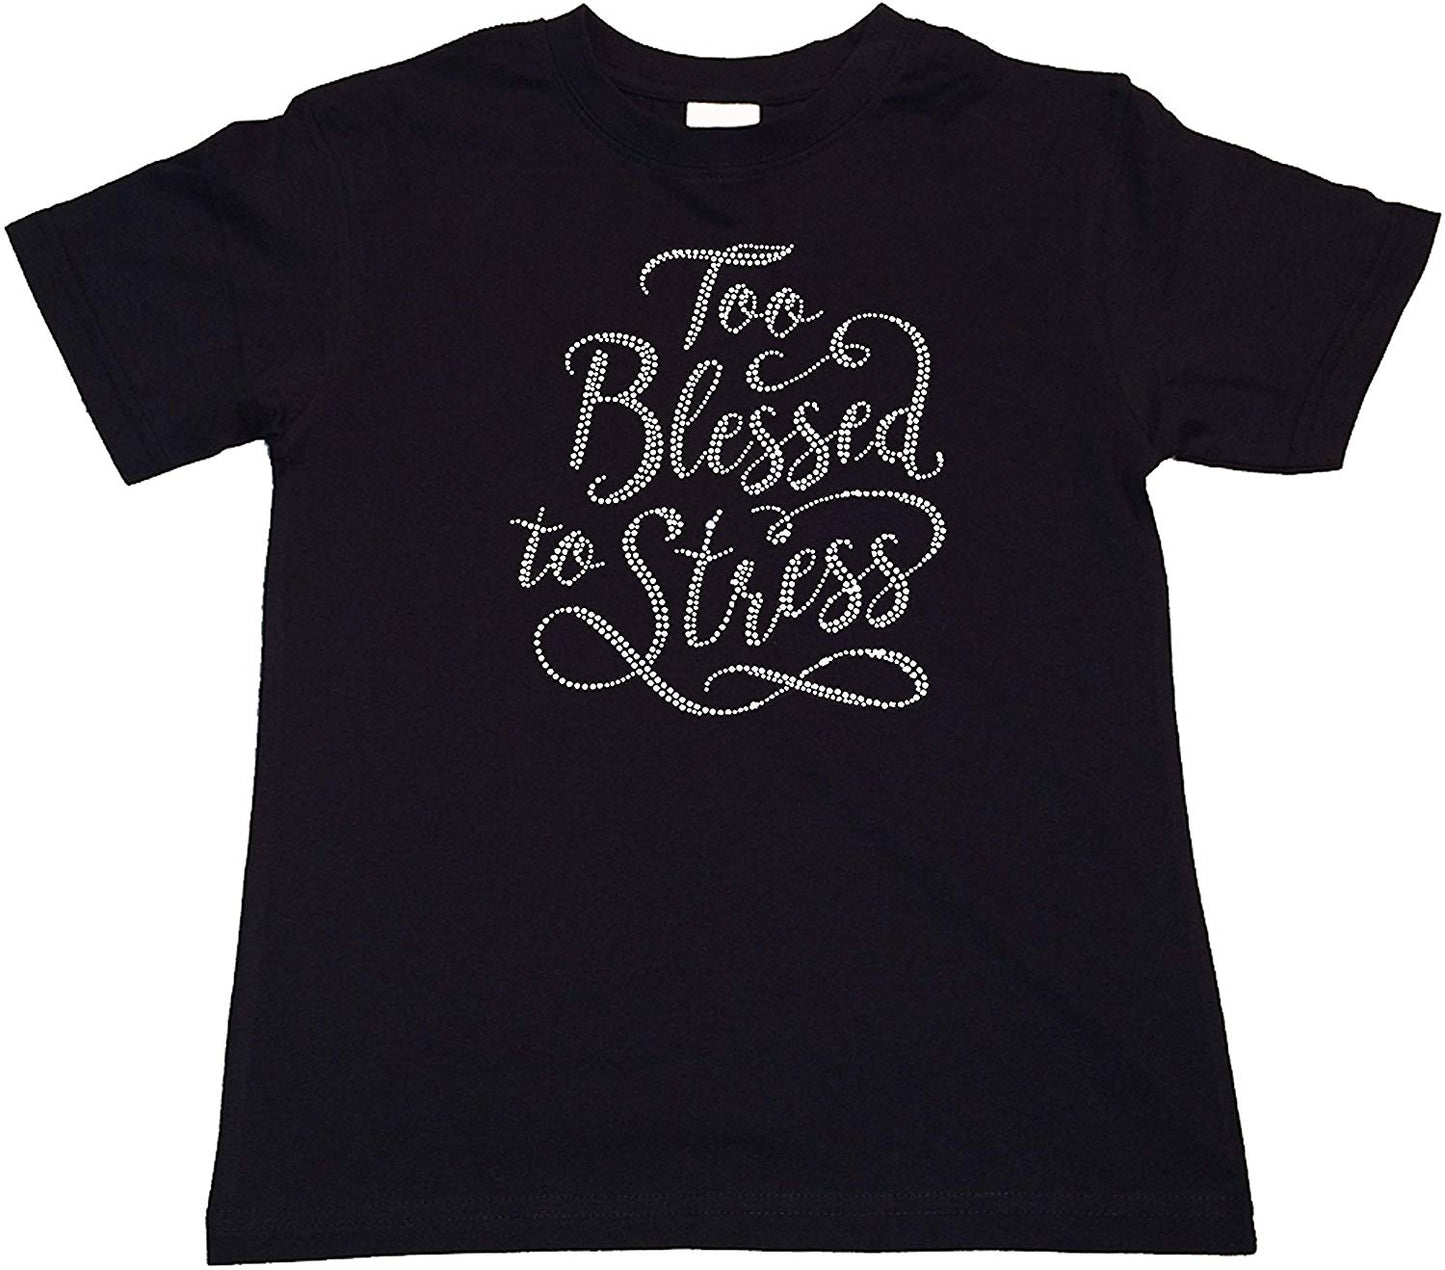 Girls Rhinestone T-Shirt " Too Blessed to Stress in Rhinestone " Kids Size 3 to 14 Available